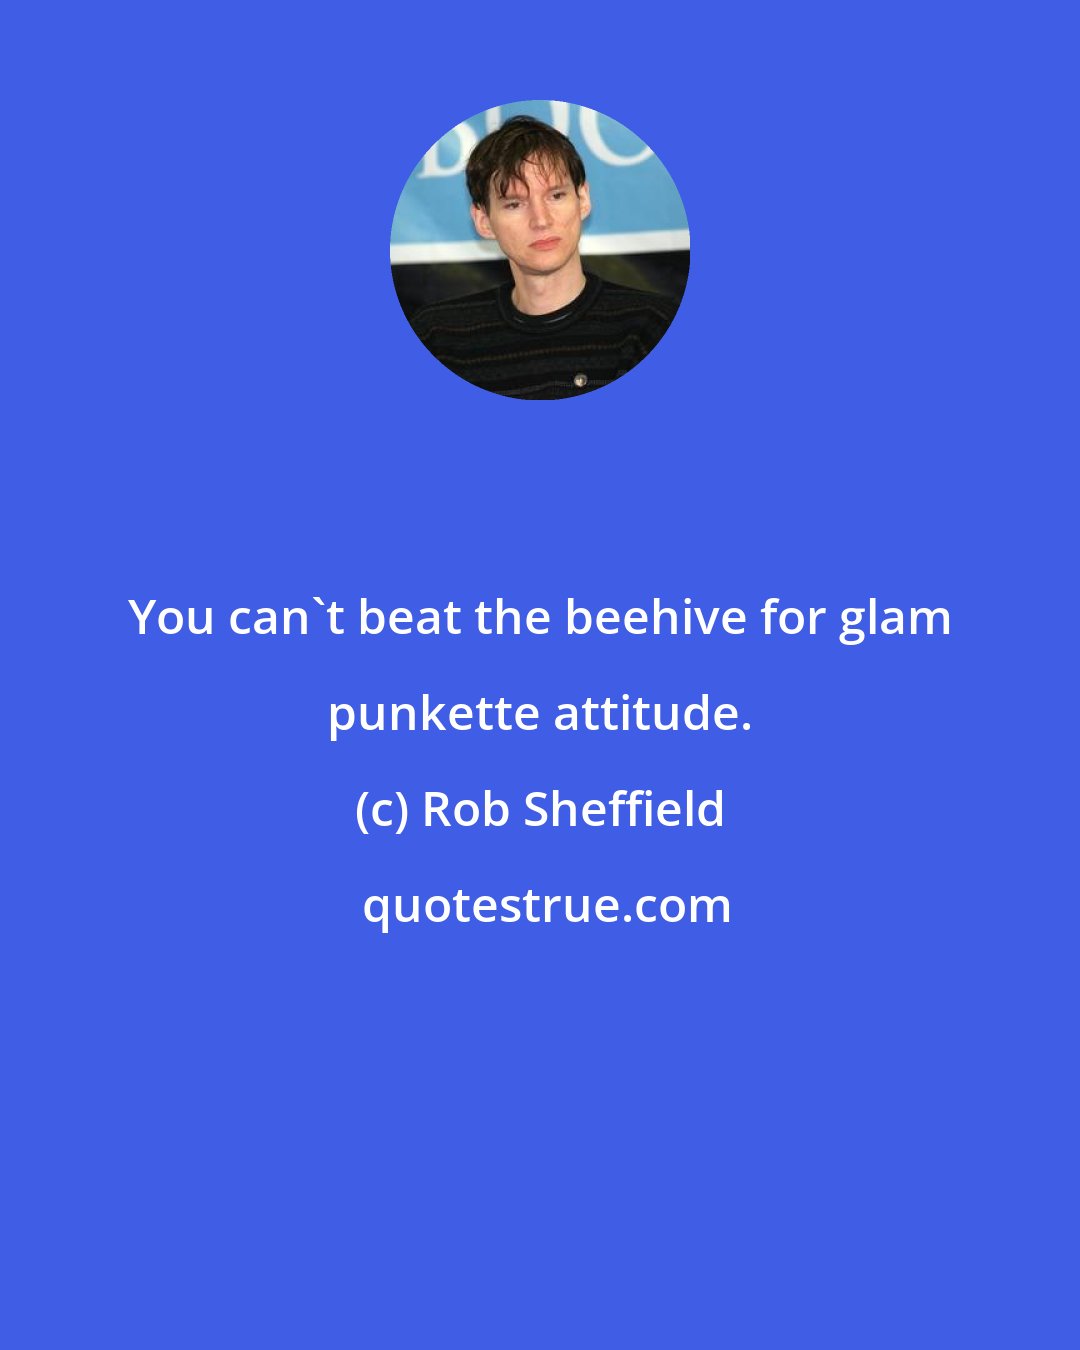 Rob Sheffield: You can't beat the beehive for glam punkette attitude.